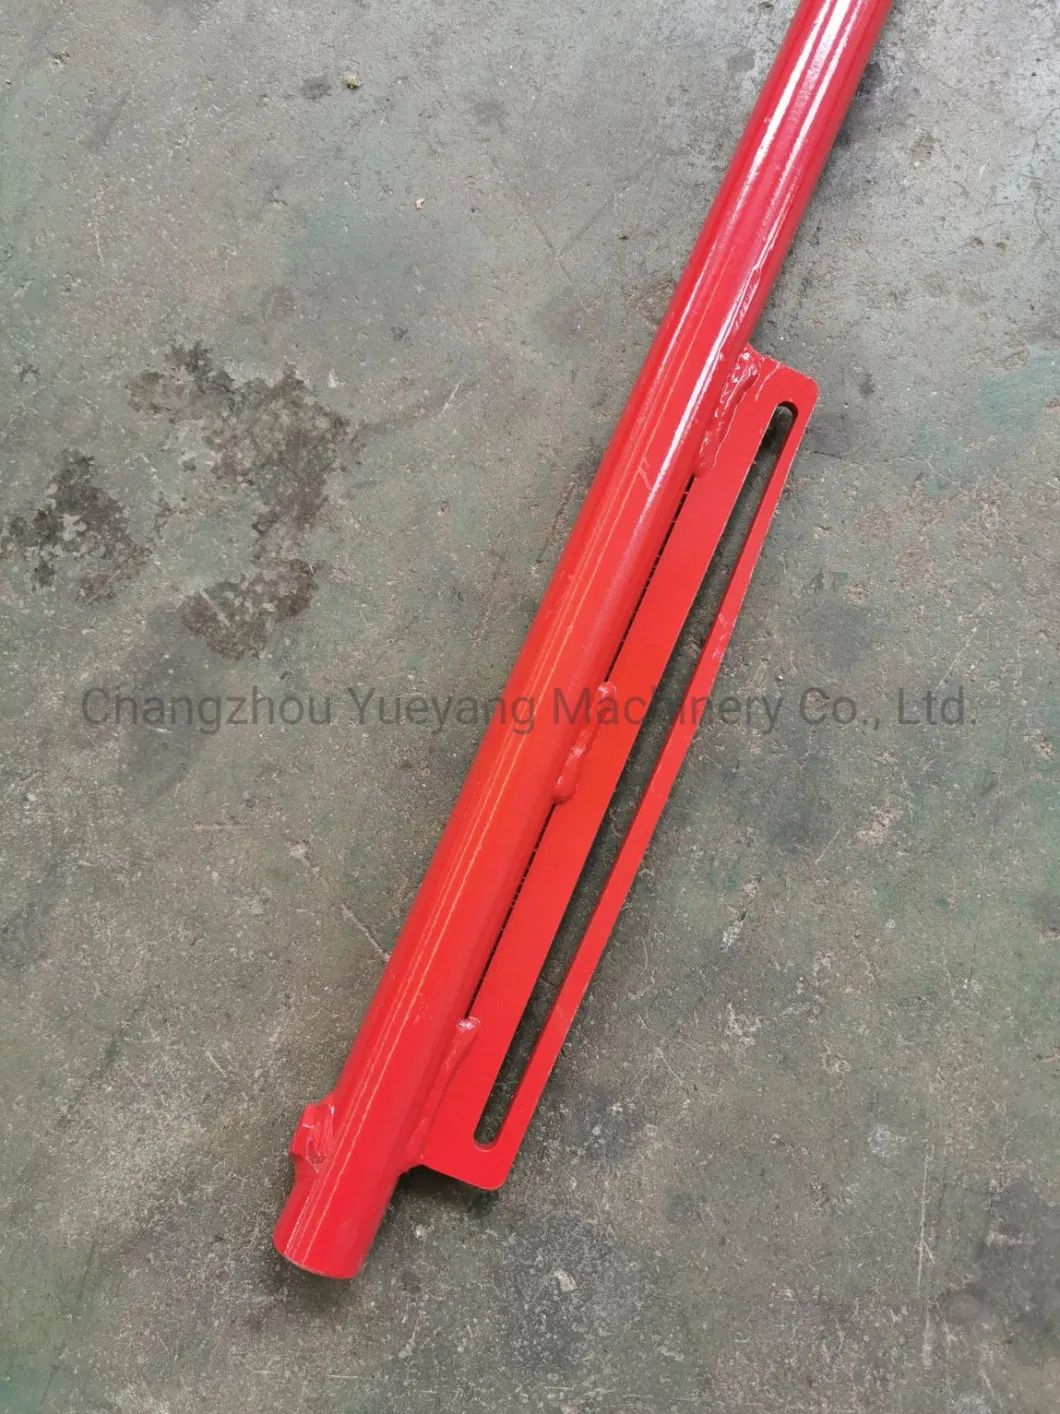 Metal Steel Folding Foldable Traffic Temporary Portable Expandable Barrier for Road Safety